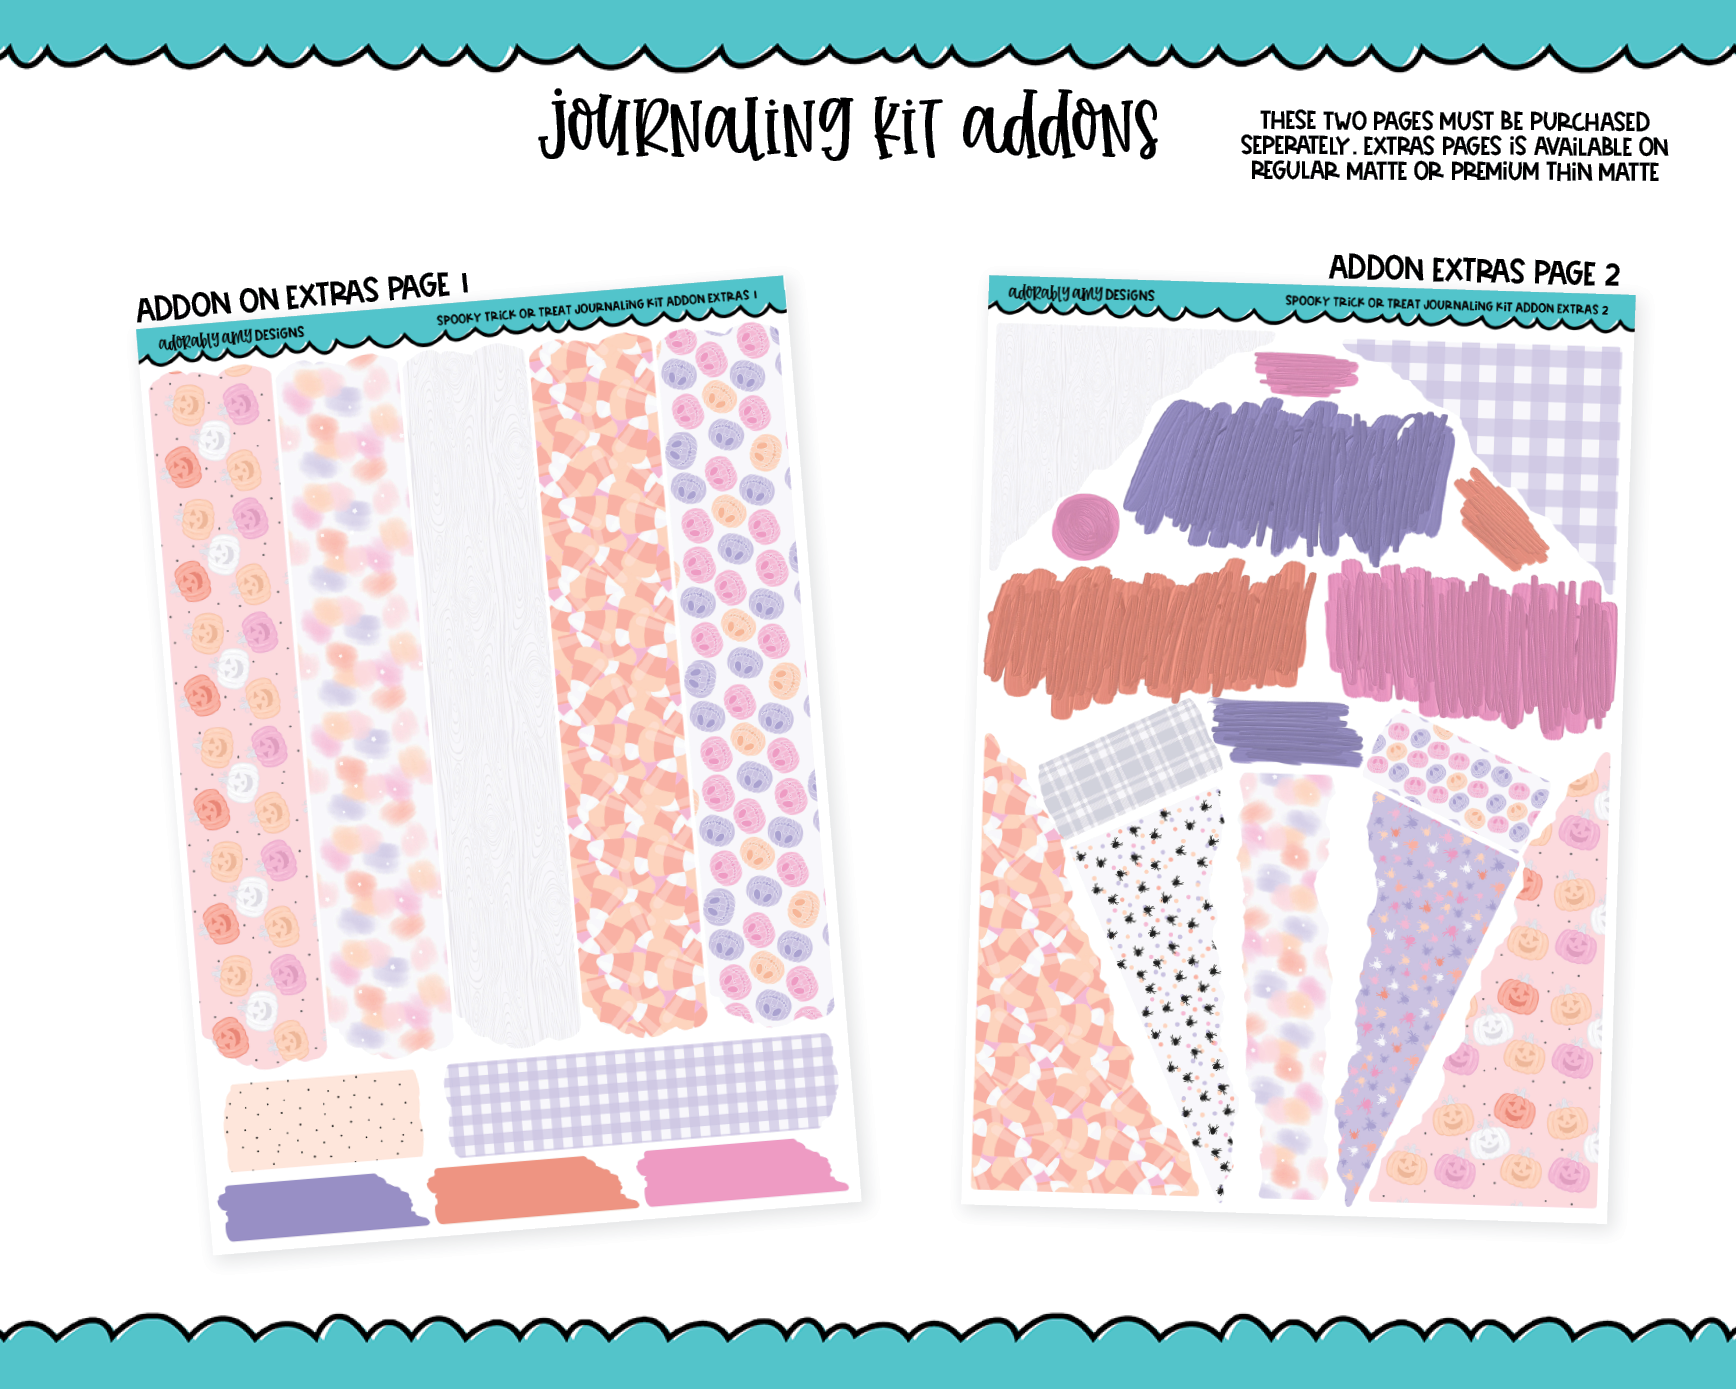 Daily/Journaling Weekly Kits – Adorably Amy Designs